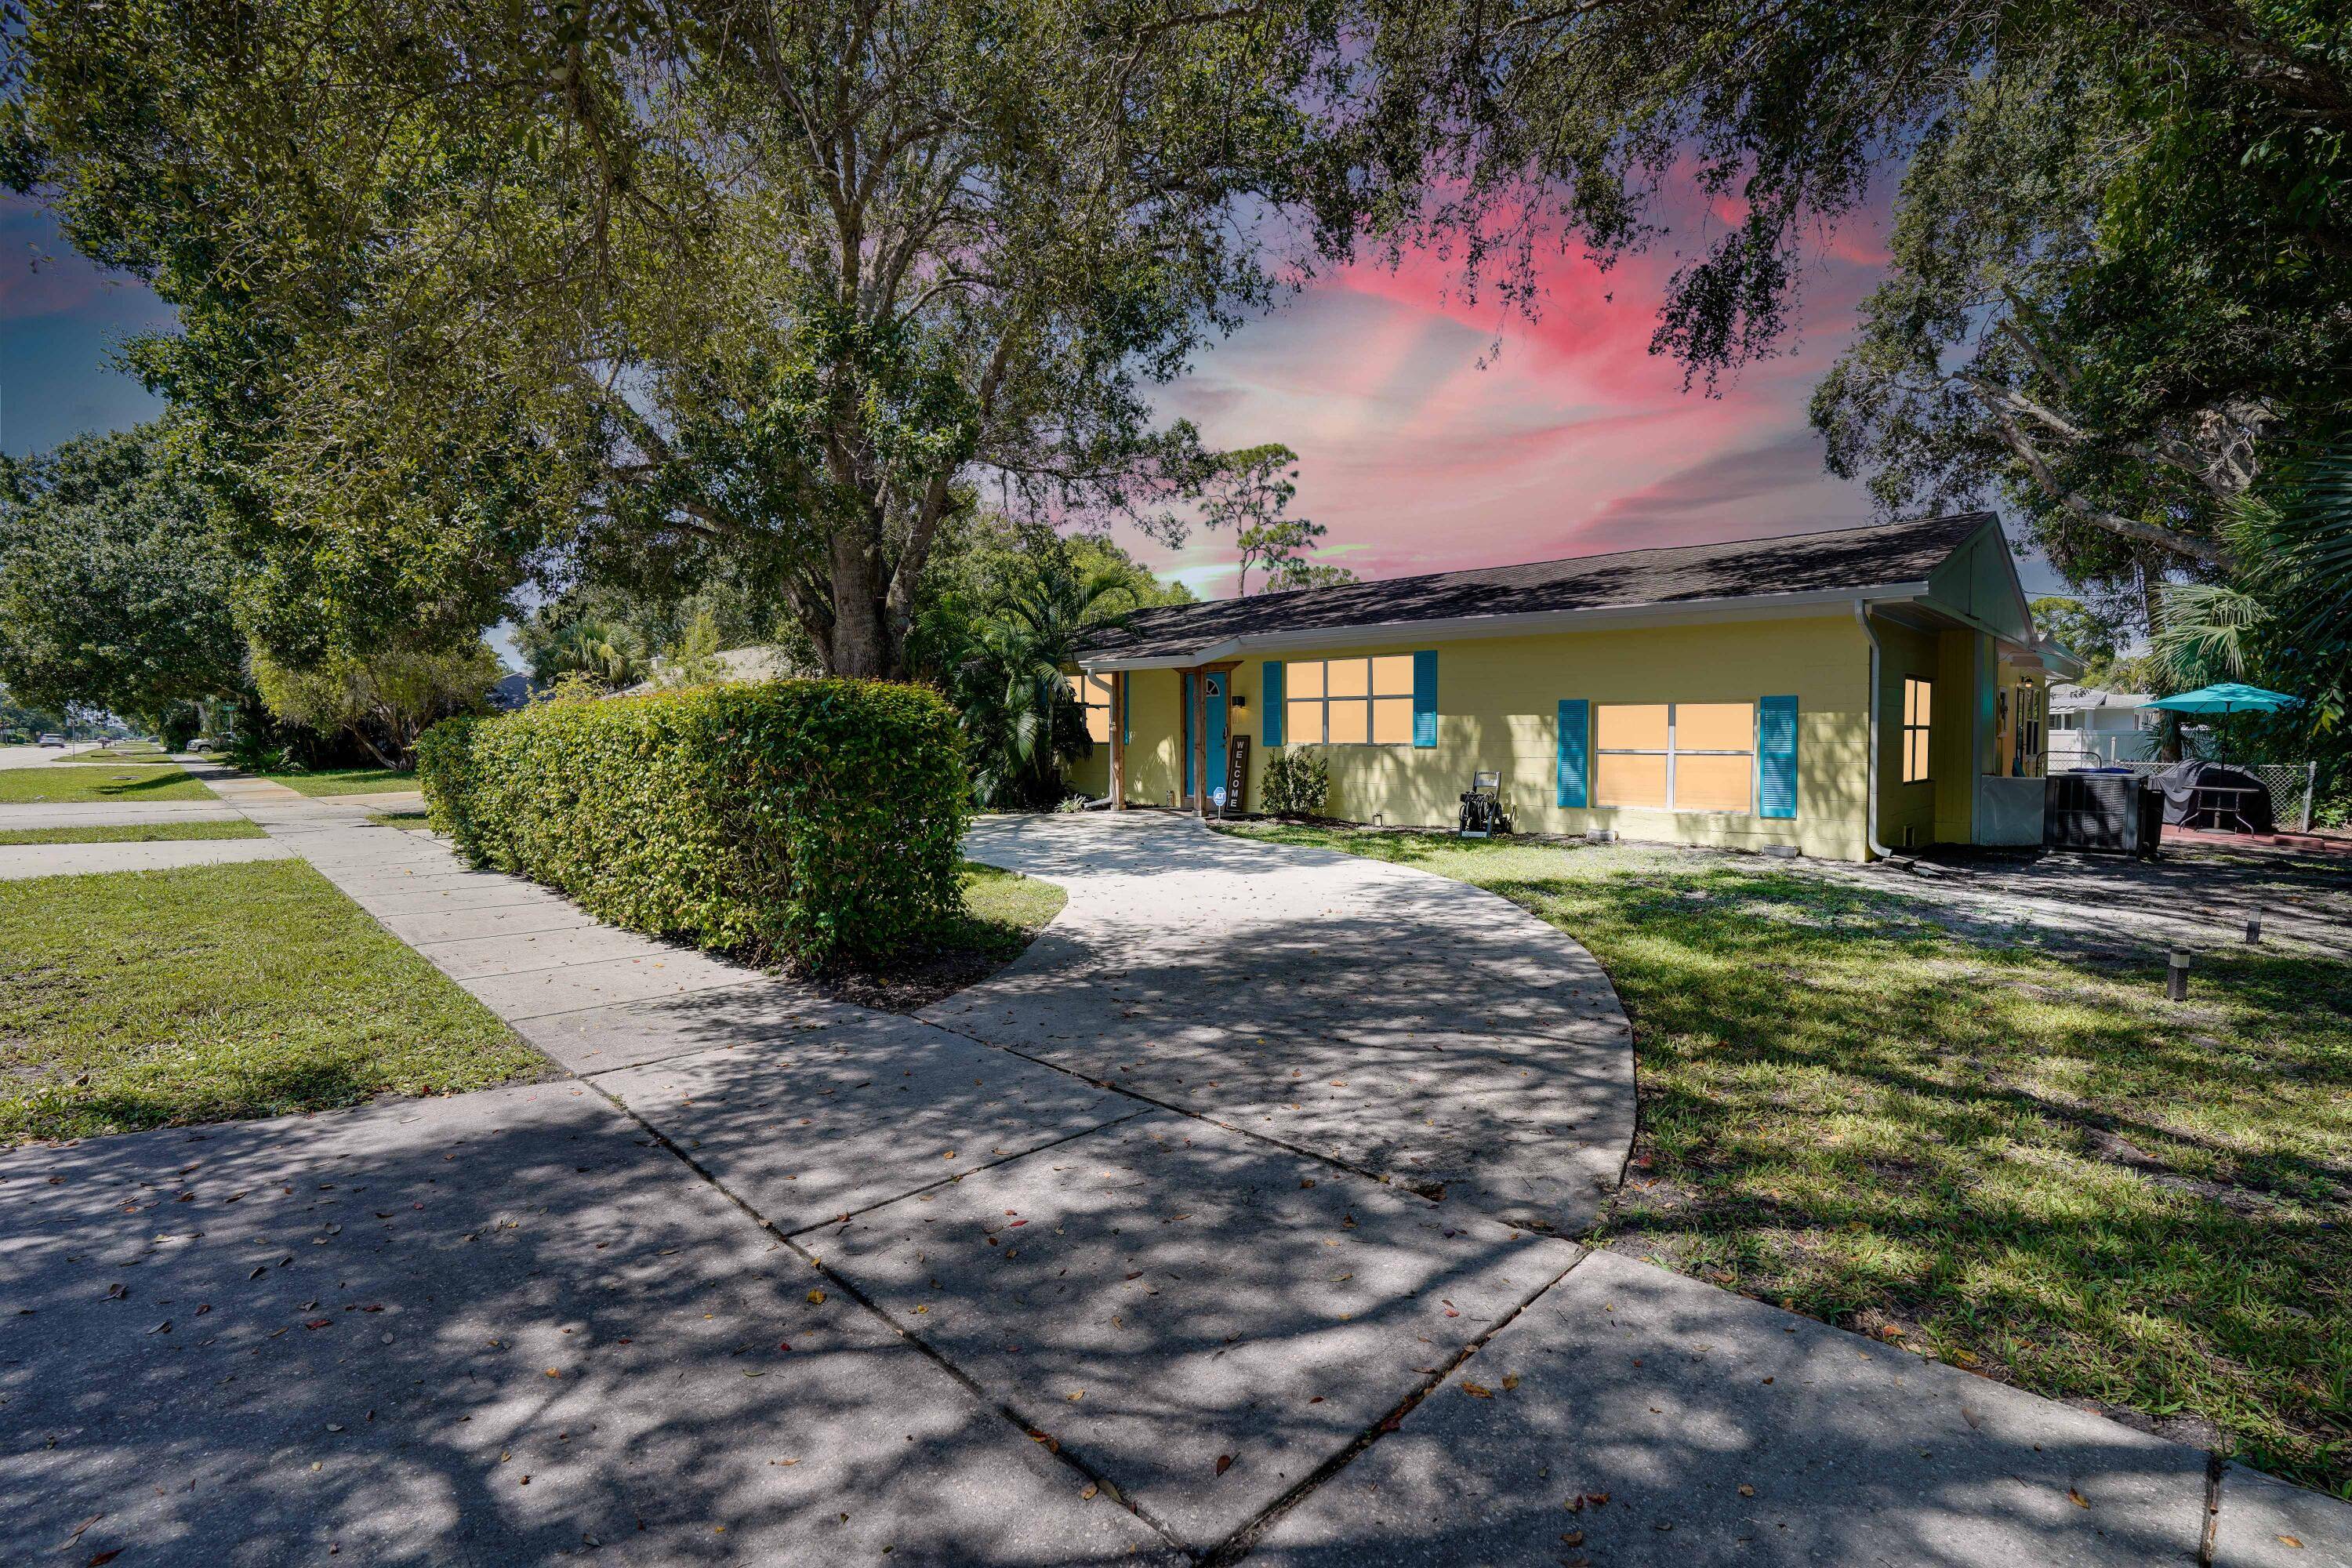 ACT FAST, THIS LUXURIOUS SINGLE FAMILY HOME IN VERO BEACH IS PRICED TO SELL !